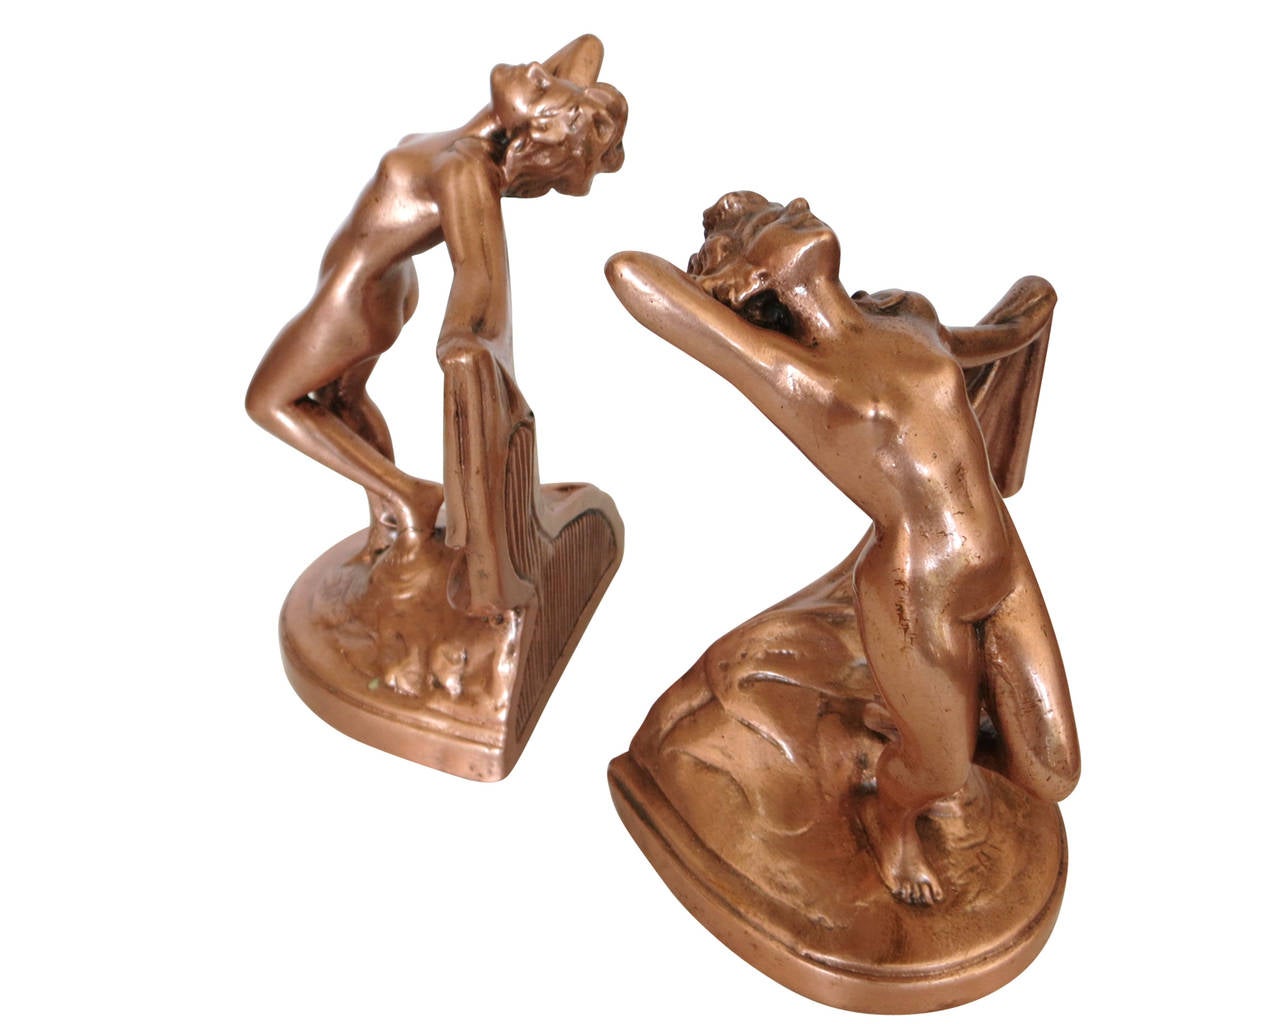 Pair of  Galvano Copper (electroformed copper) bookends each featuring a nude dancer holding a draping piece of cloth. Both pieces where produced by Pul Mori & Son in 1920.

This set has been named 